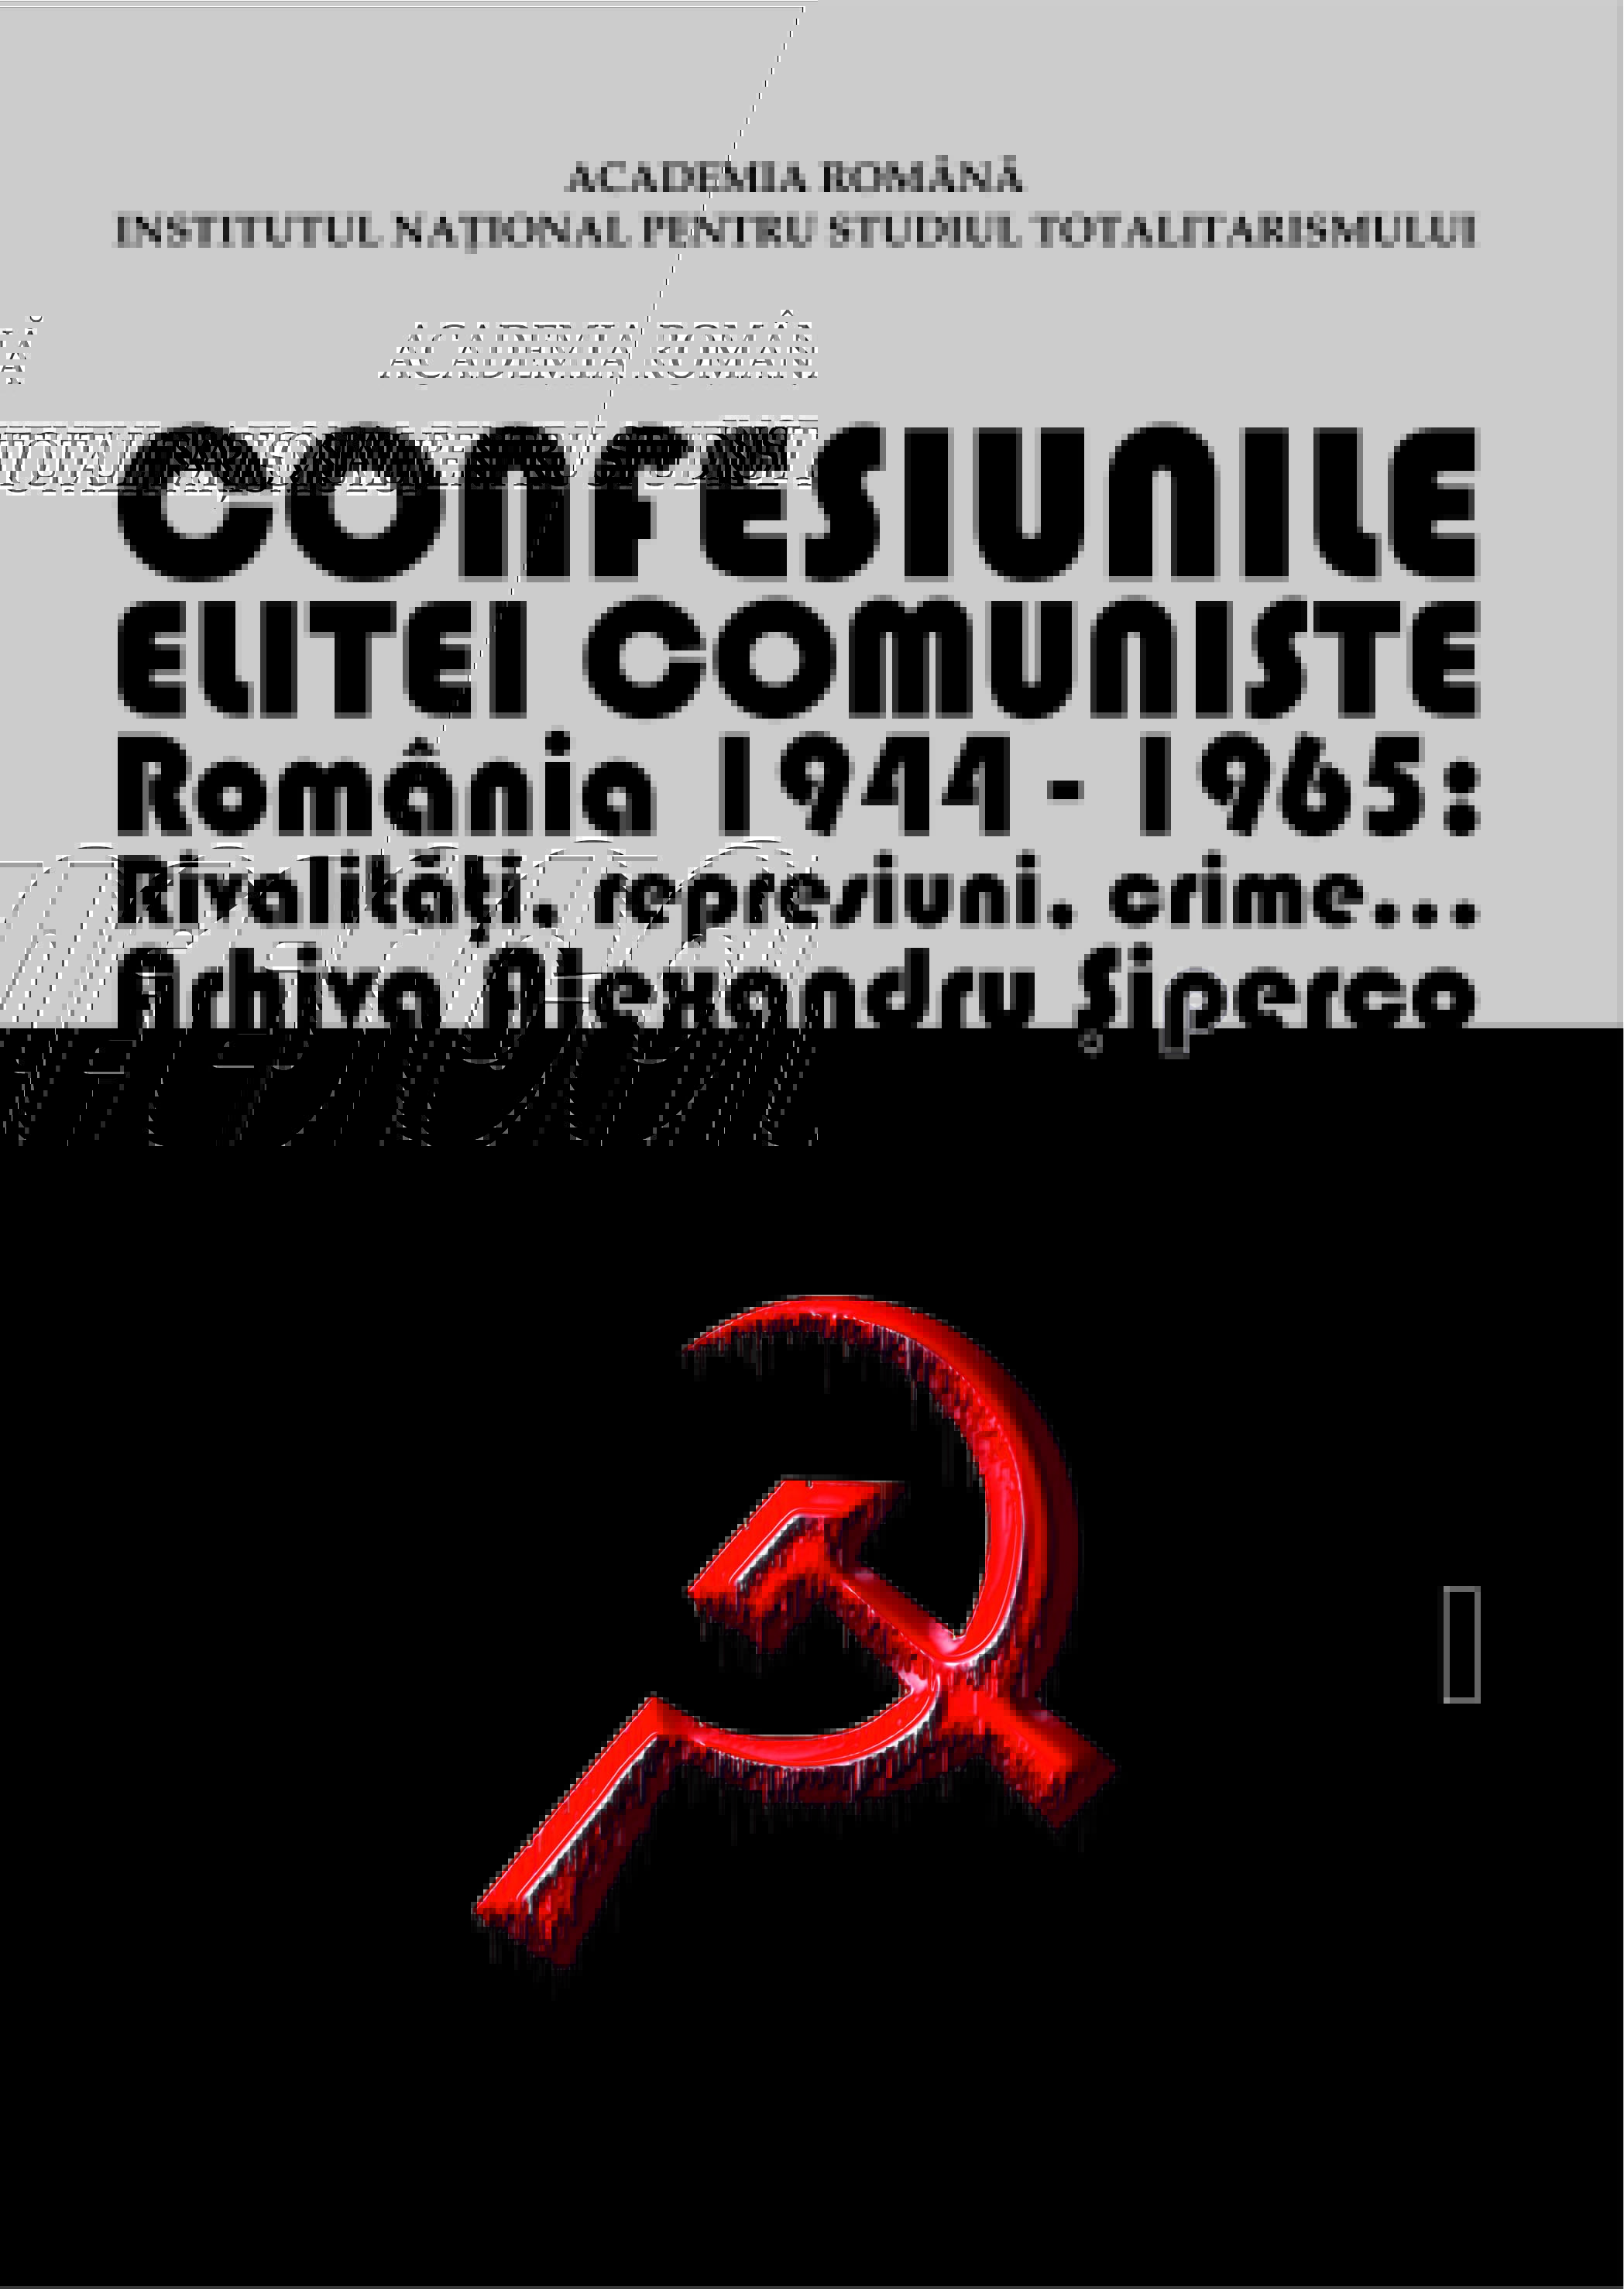 Confessions of the Communist elite. Romania 1944-1965: rivalries, repressions, murders… Alexander Siperco Archive, Volume I Cover Image